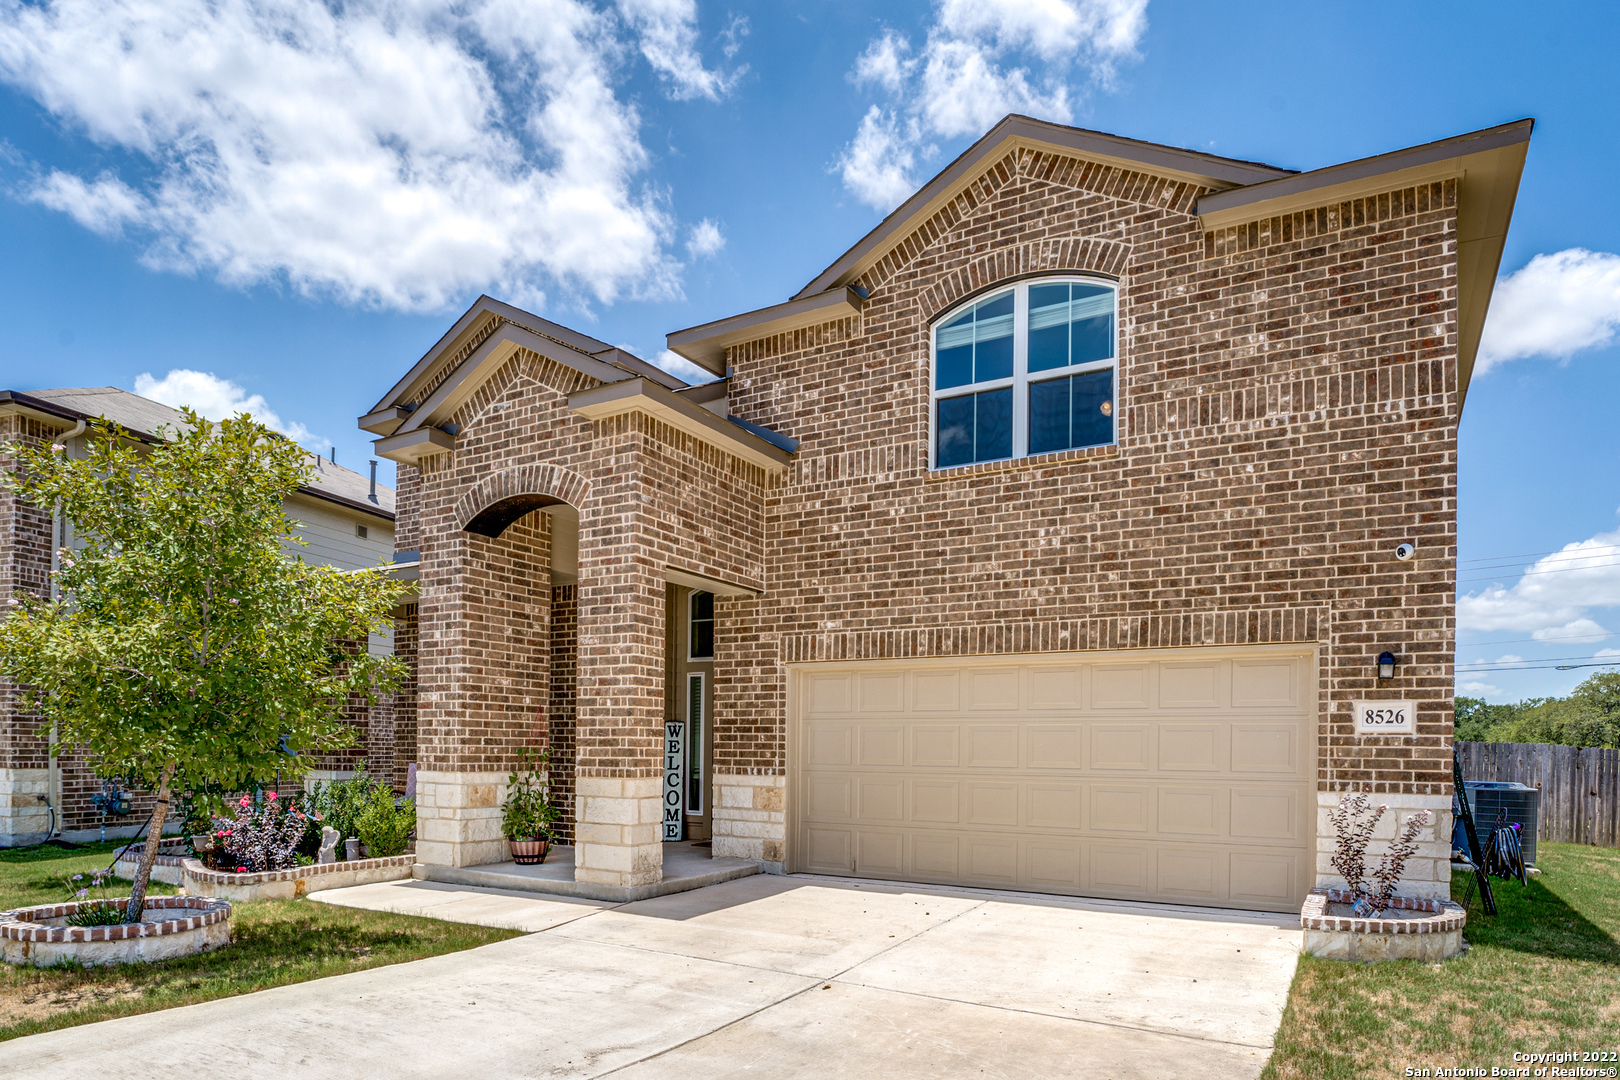 Beautifully maintained 2 story home located in the Valley Ranch community near I-410 and 1604. Minutes away from Sea World, The Rim and Six Flags Fiesta Texas. Bright open floor plan with custom ceiling treatments and laminate wood-like floors throughout main living areas. Private study upon entrance with French doors . Island kitchen features granite countertops, abundant cabinetry, and eat in breakfast nook. The spacious living room opens up to the oversized backyard which backs up to green space. The expanded deck has built-in seating-perfect for summer nights! Comfortable master suite boasts generous walk-in closet as well as private bath with dual vanity, separate shower, and garden tub. Generously sized family room on second floor that could be turned into a game or media room. Home features energy efficient solar panels!